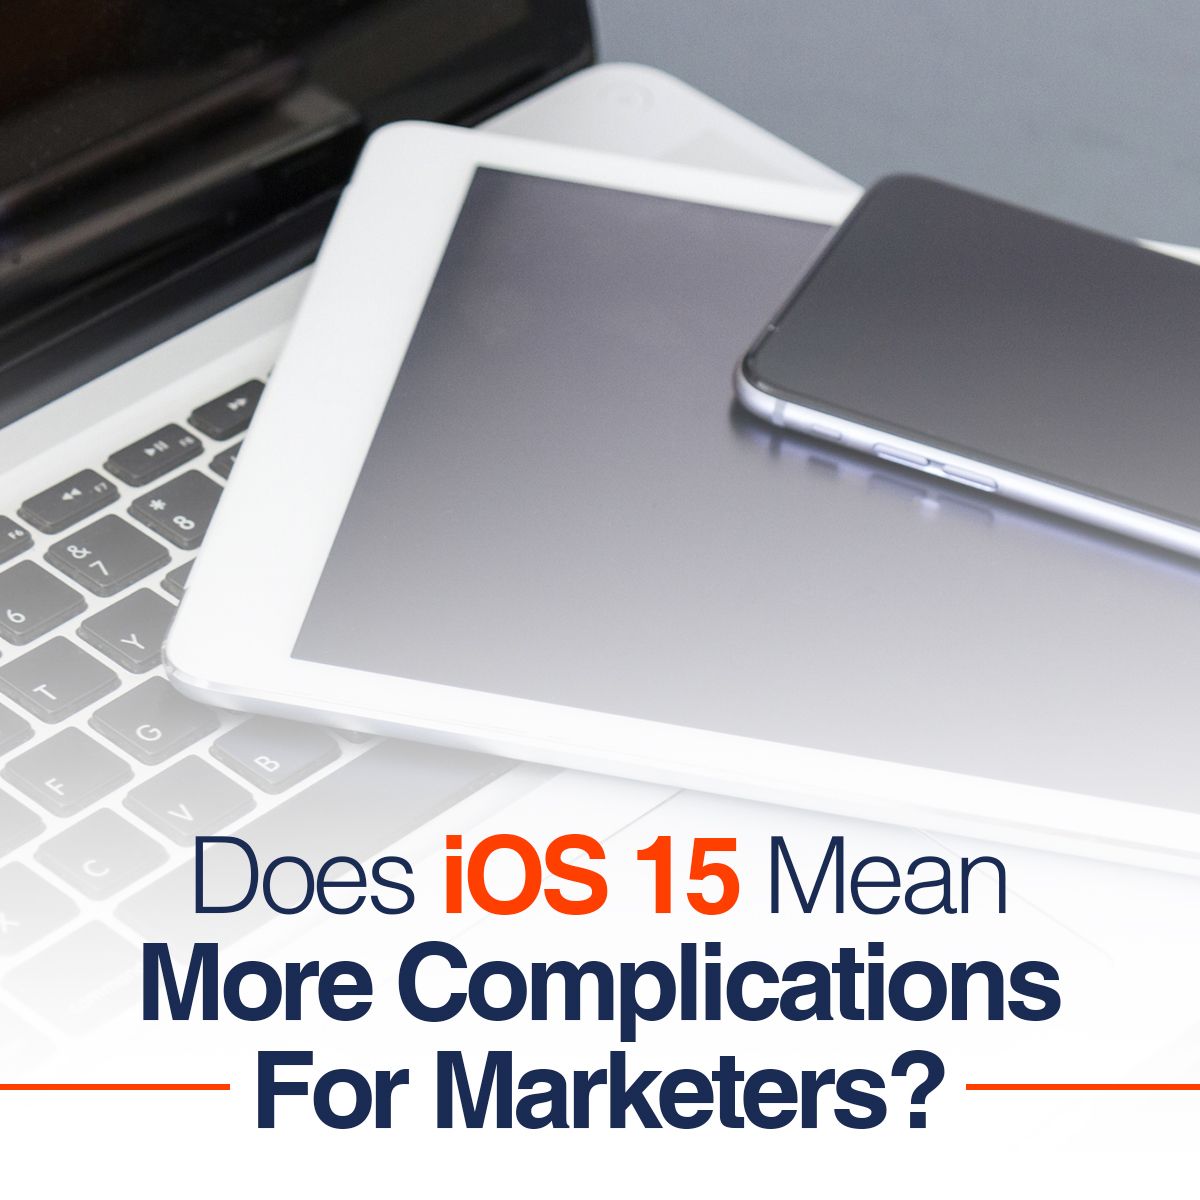 Does iOS 15 Mean More Complications For Marketers?